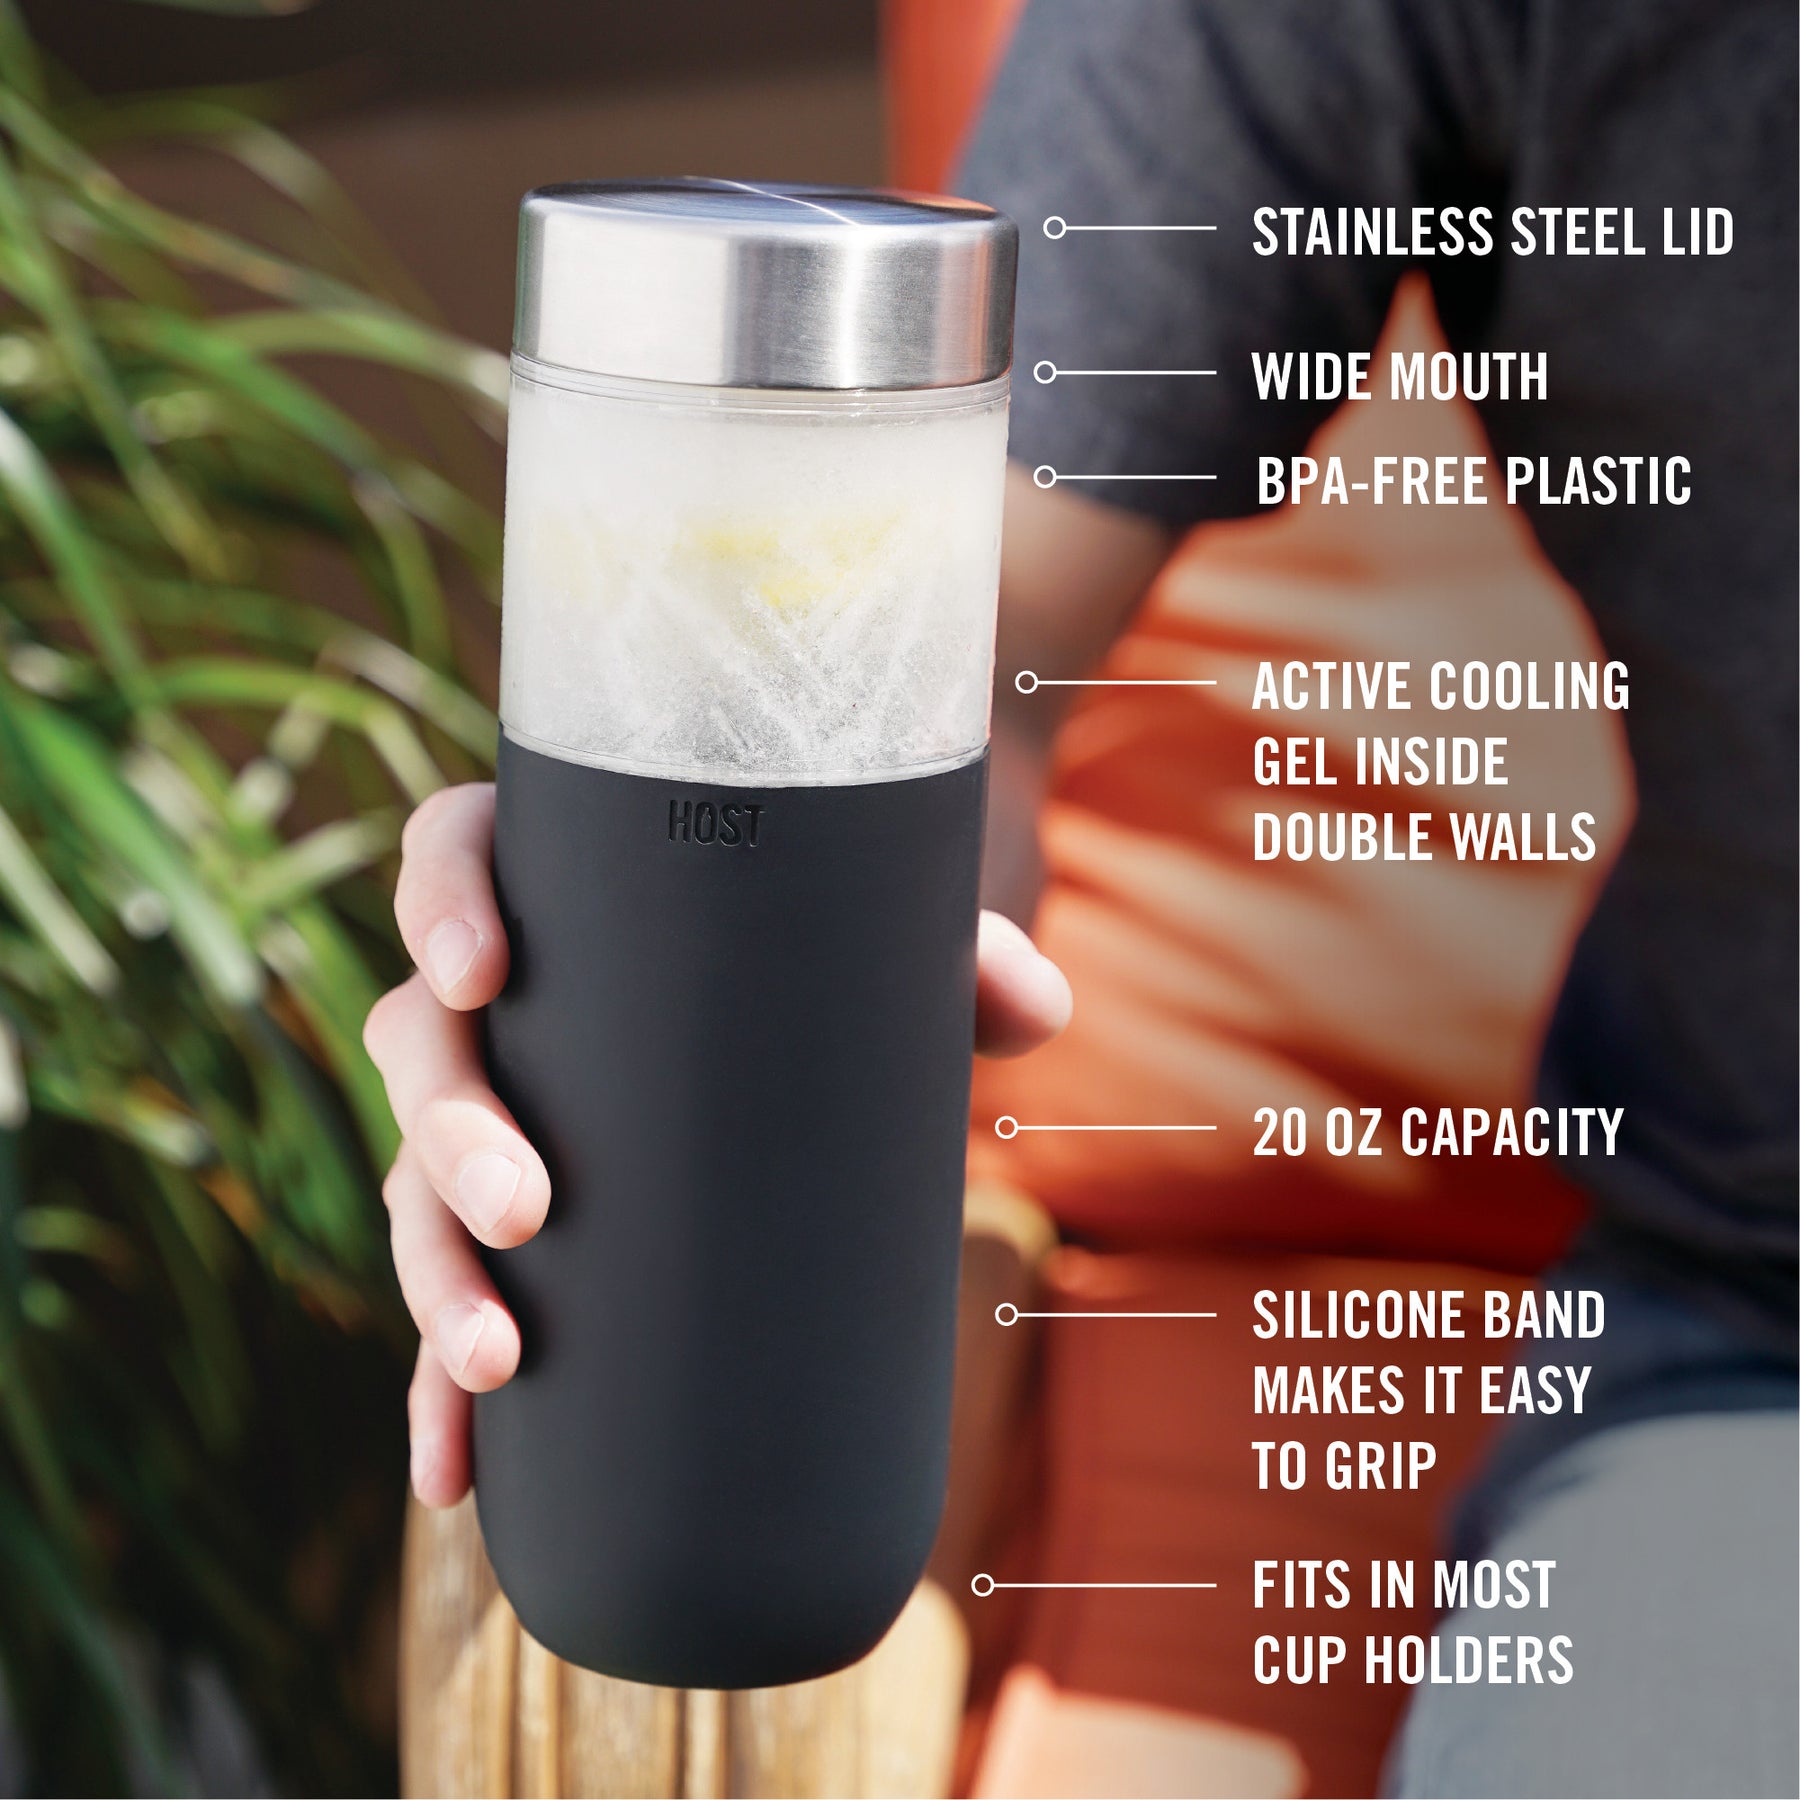 This Girl Runs on Dr. Pepper Insulated Tumbler with Lid and  Straw, Reusable Travel Tumbler for Water, Smoothies, and Tea. 20oz Iced  Coffee Cup with Lid & Stainless Steel Straw.